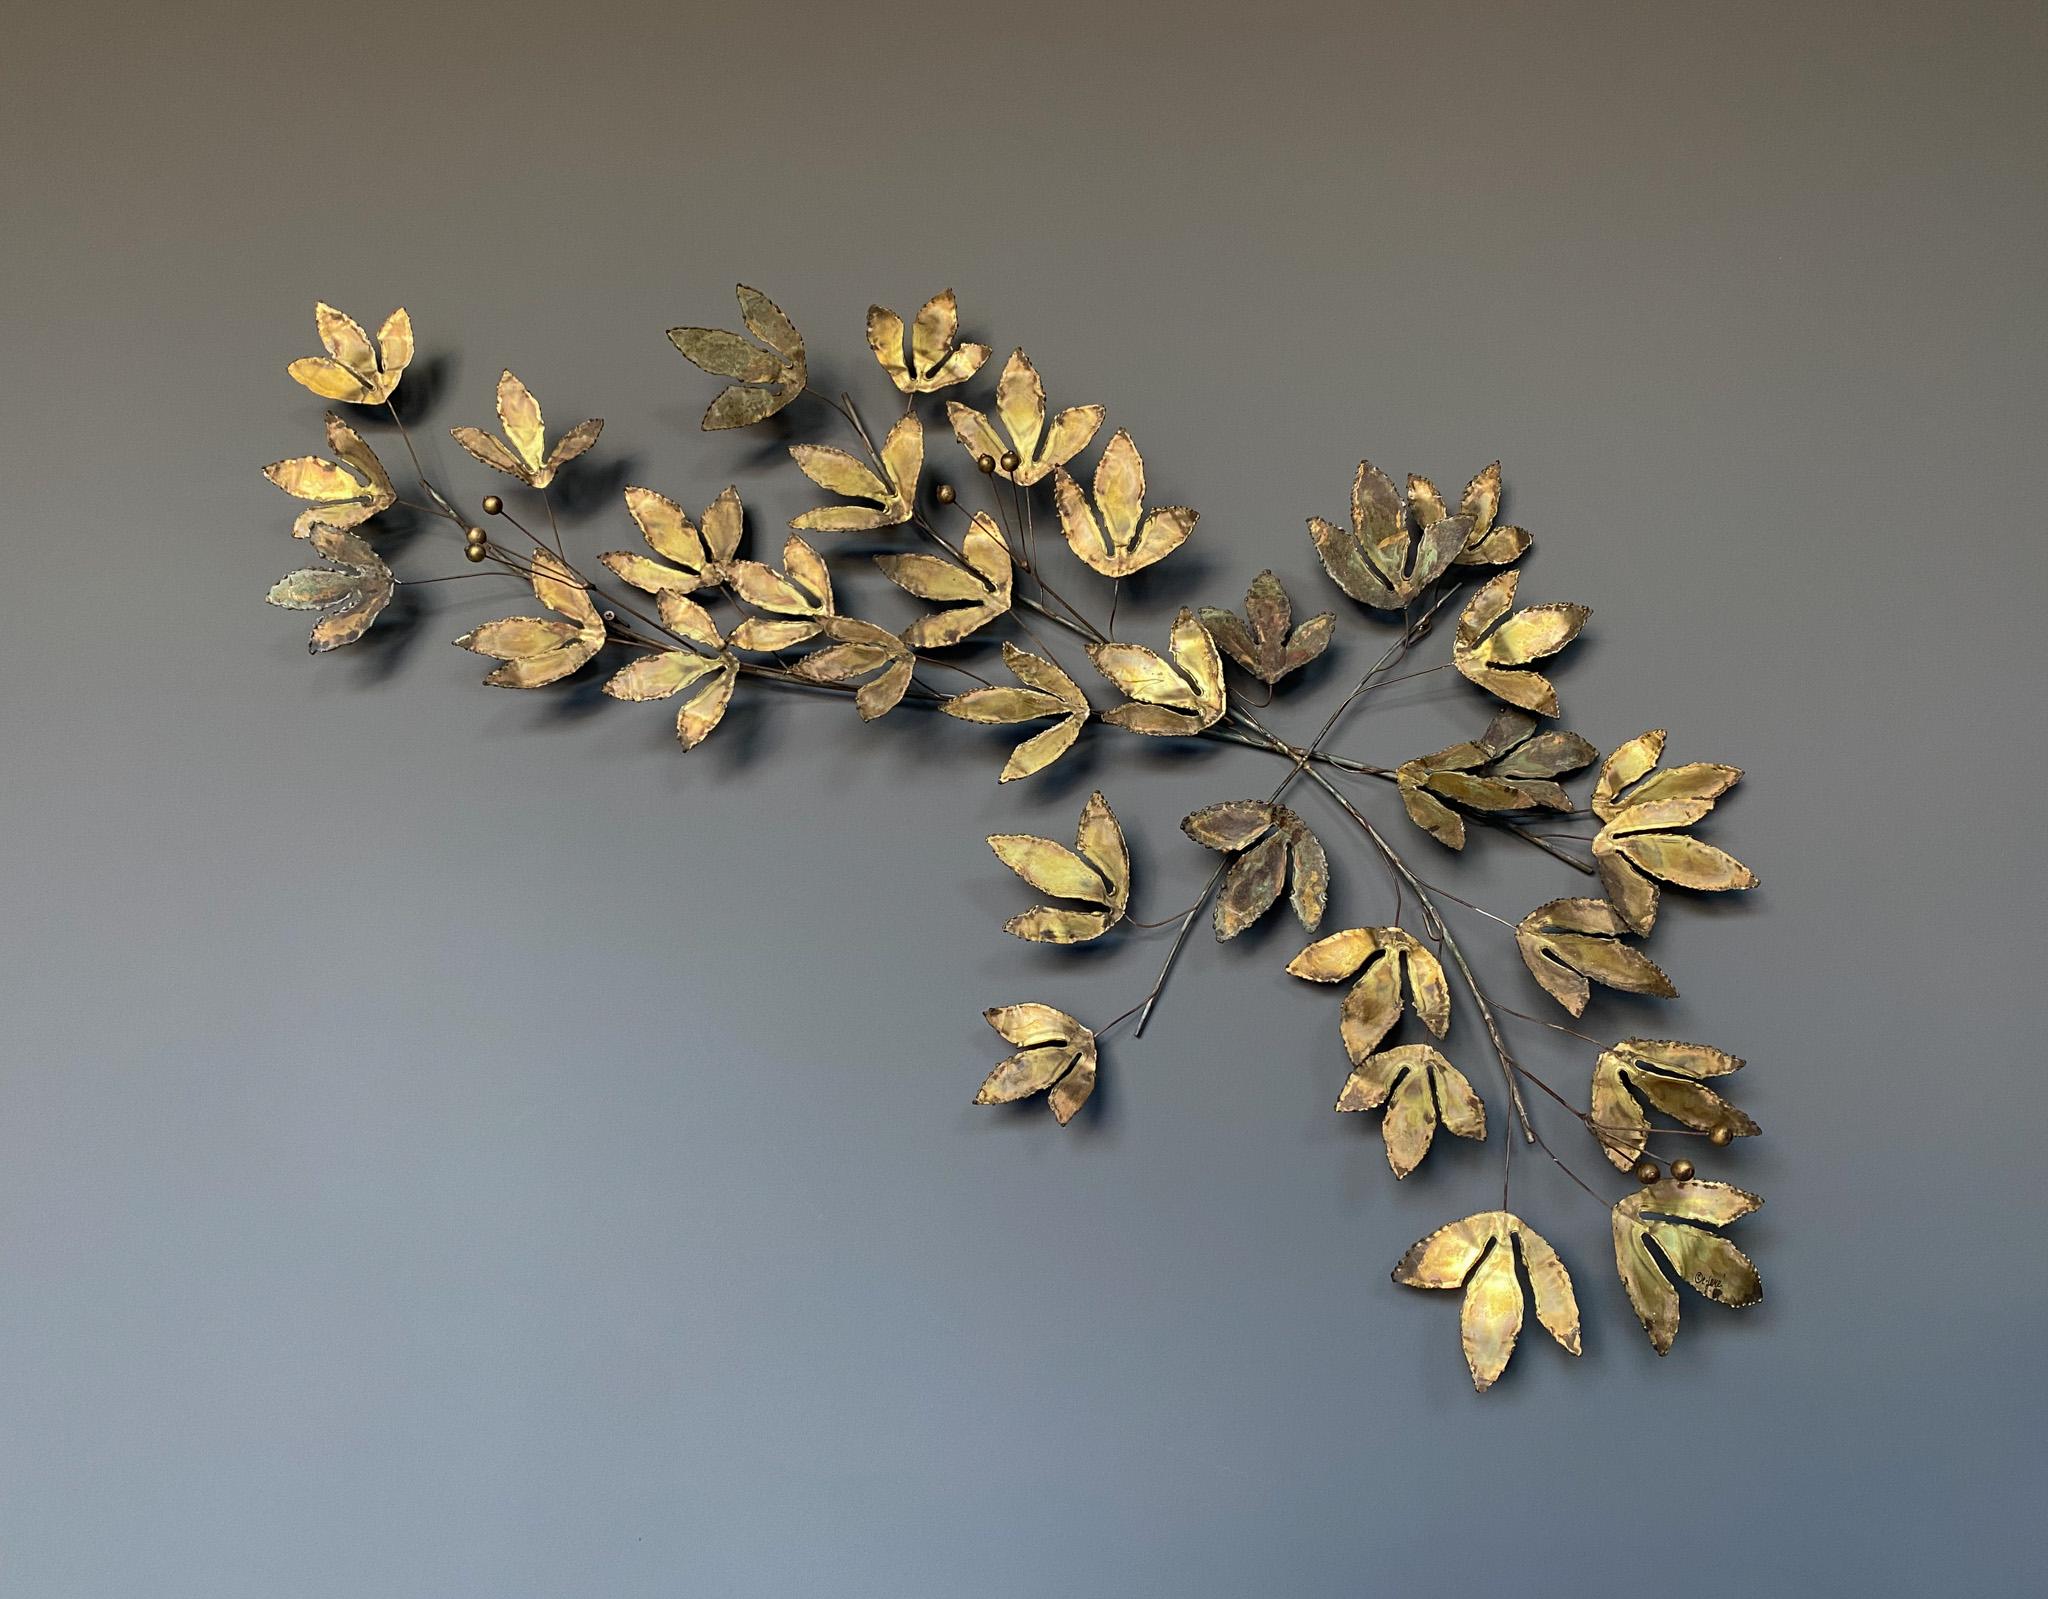 Mid-Century Modern Curtis Jere Brass Leaf Wall Sculpture, Signed C.Jere 1969